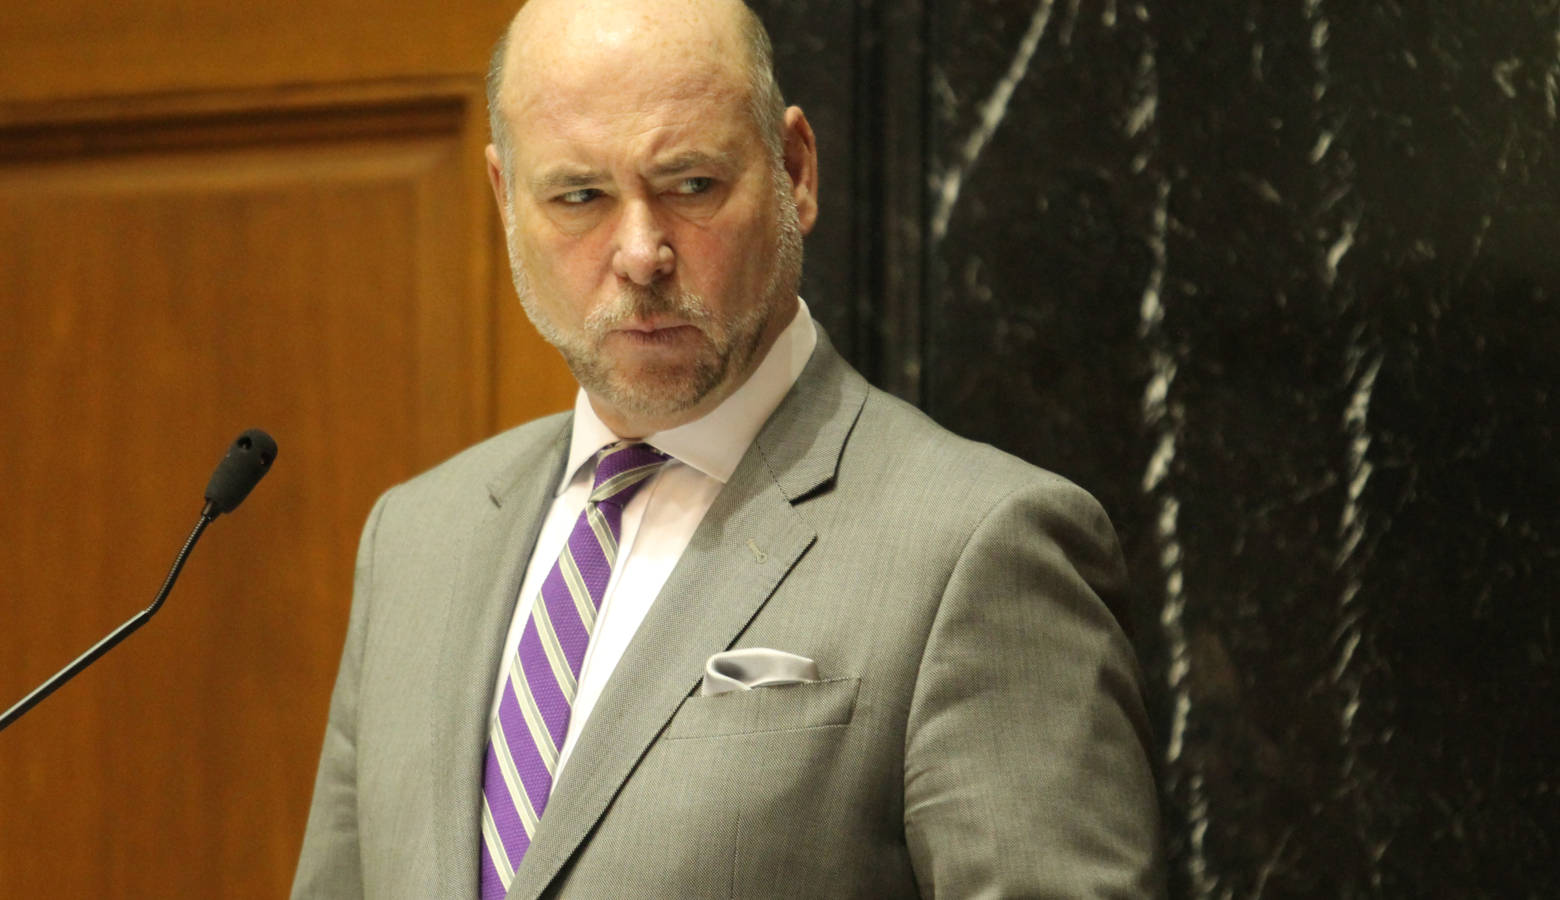 House Speaker Brian Bosma (R-Indianapolis) says members of the GOP caucus - many of whom represent rural areas - had concerns with the township reform bill. (Lauren Chapman/IPB News)